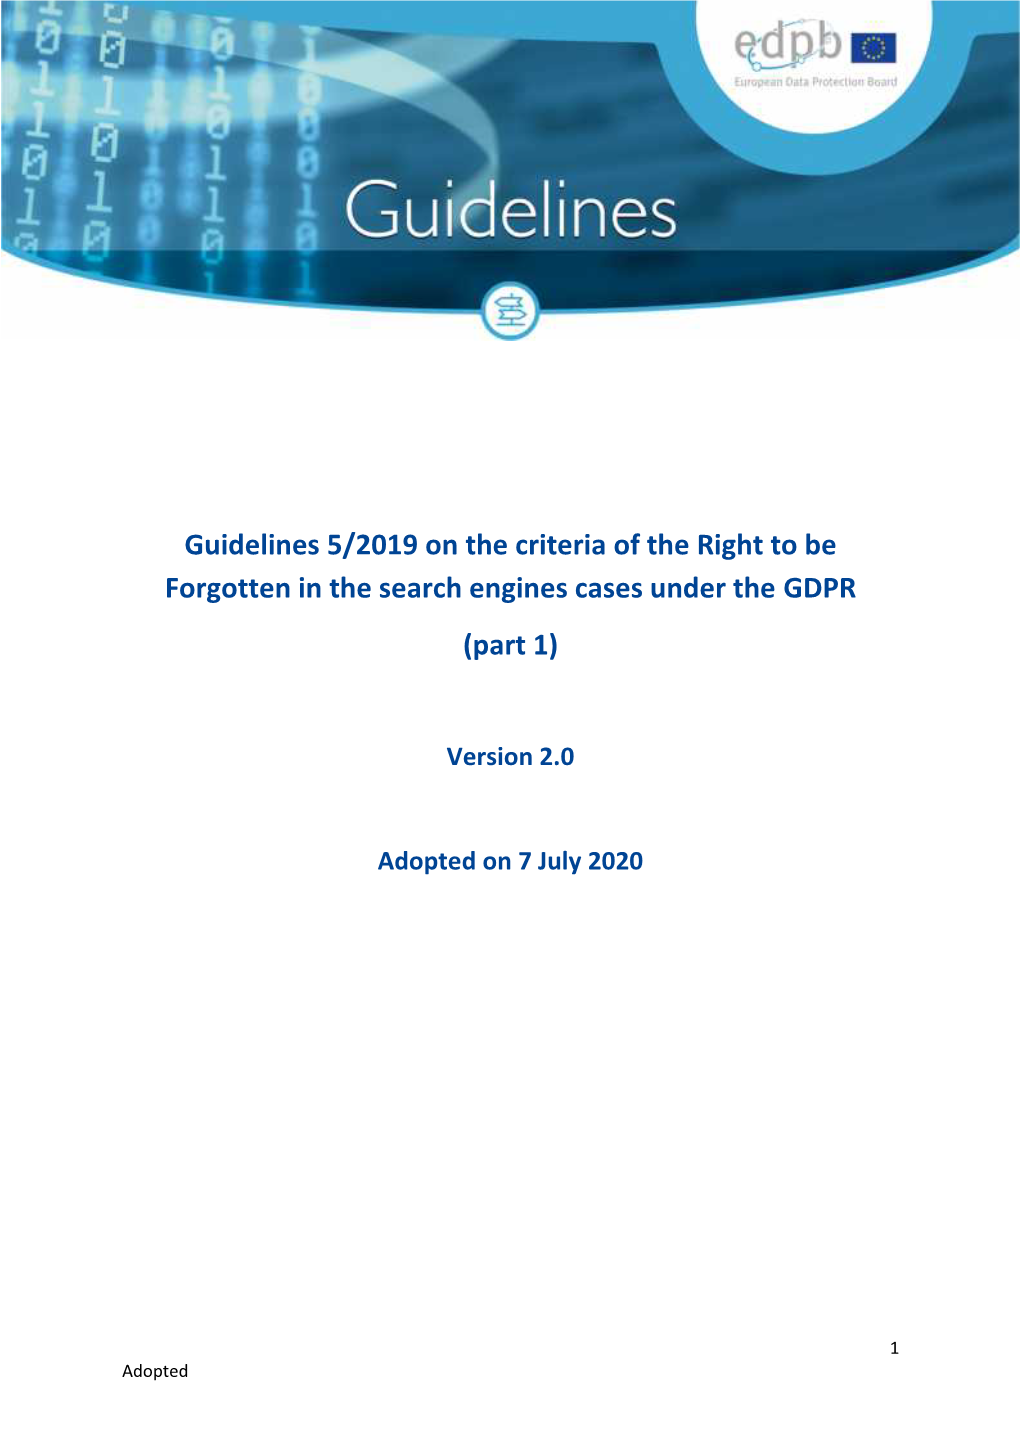 EDPB Guidelines 5/2019 on the Criteria of the Right to Be Forgotten